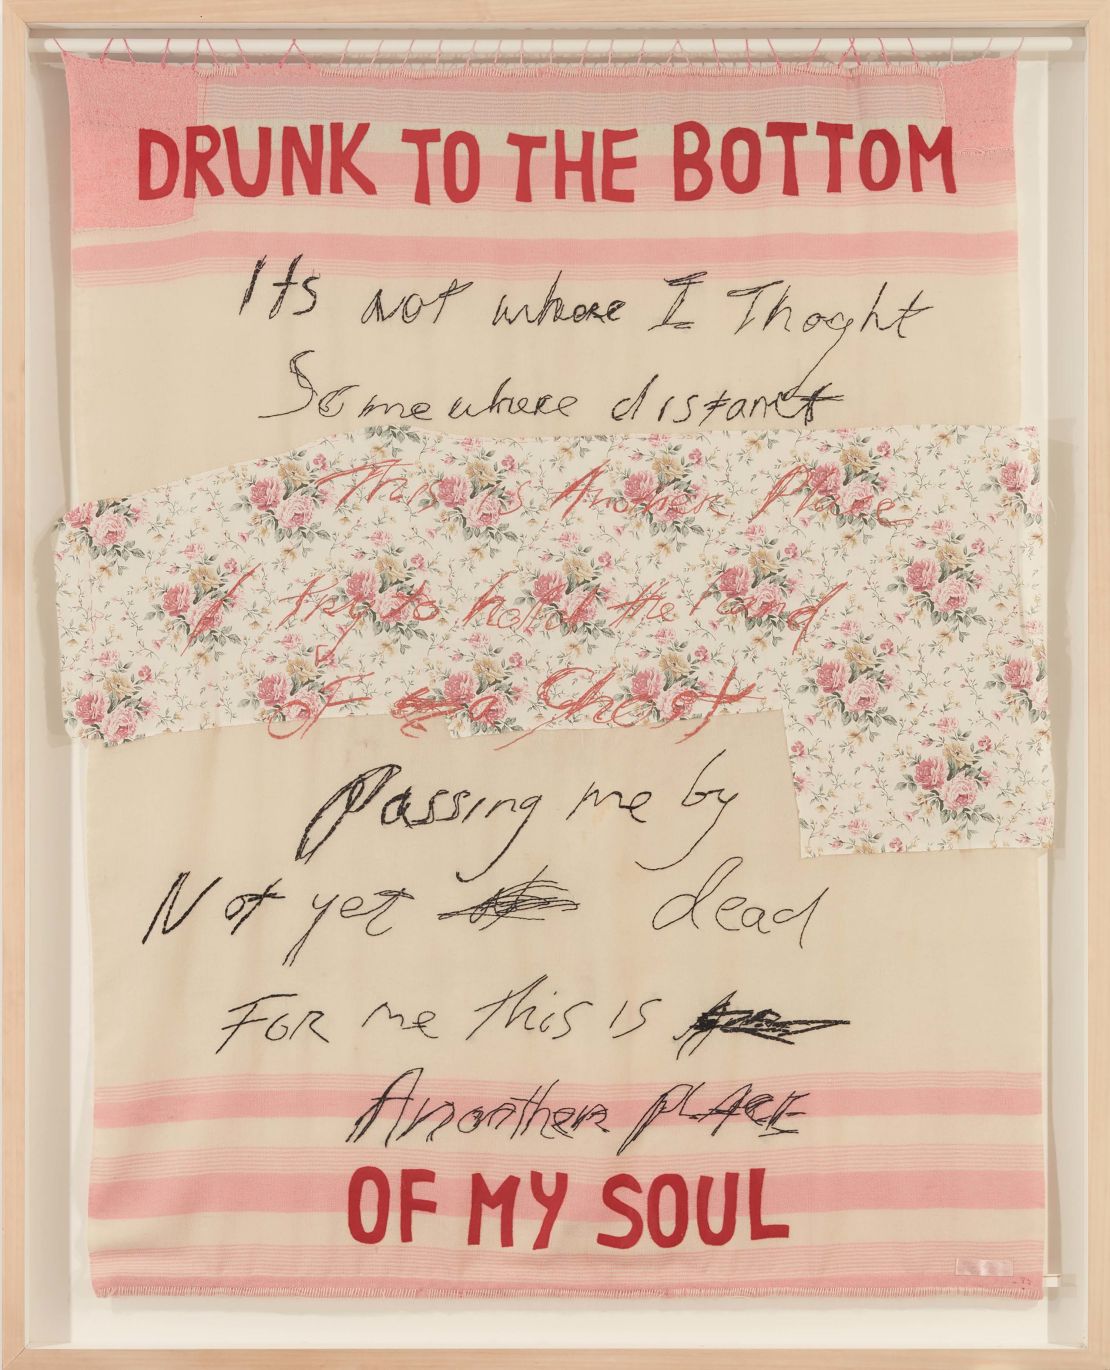 Tracey Emin's Drunk to the Bottom of my Soul, produced in 2002.